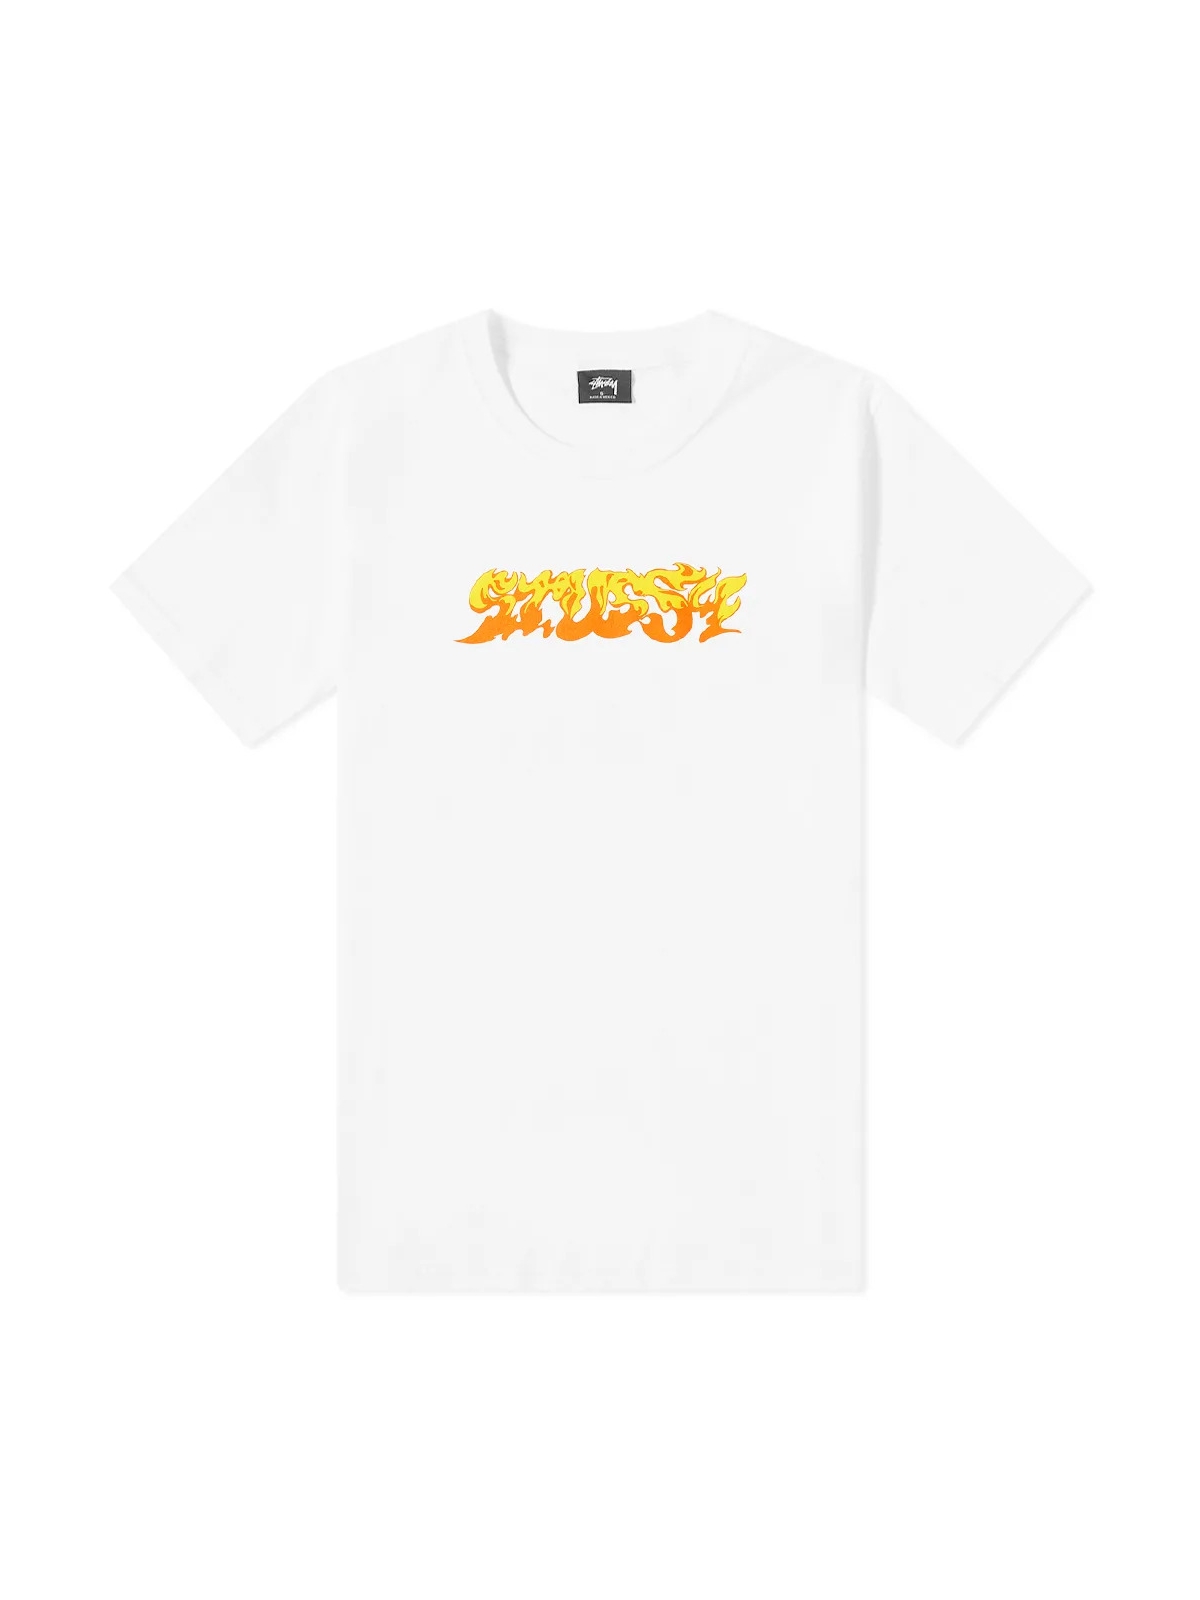 Stüssy Flames Tee White – WORMHOLE STORE